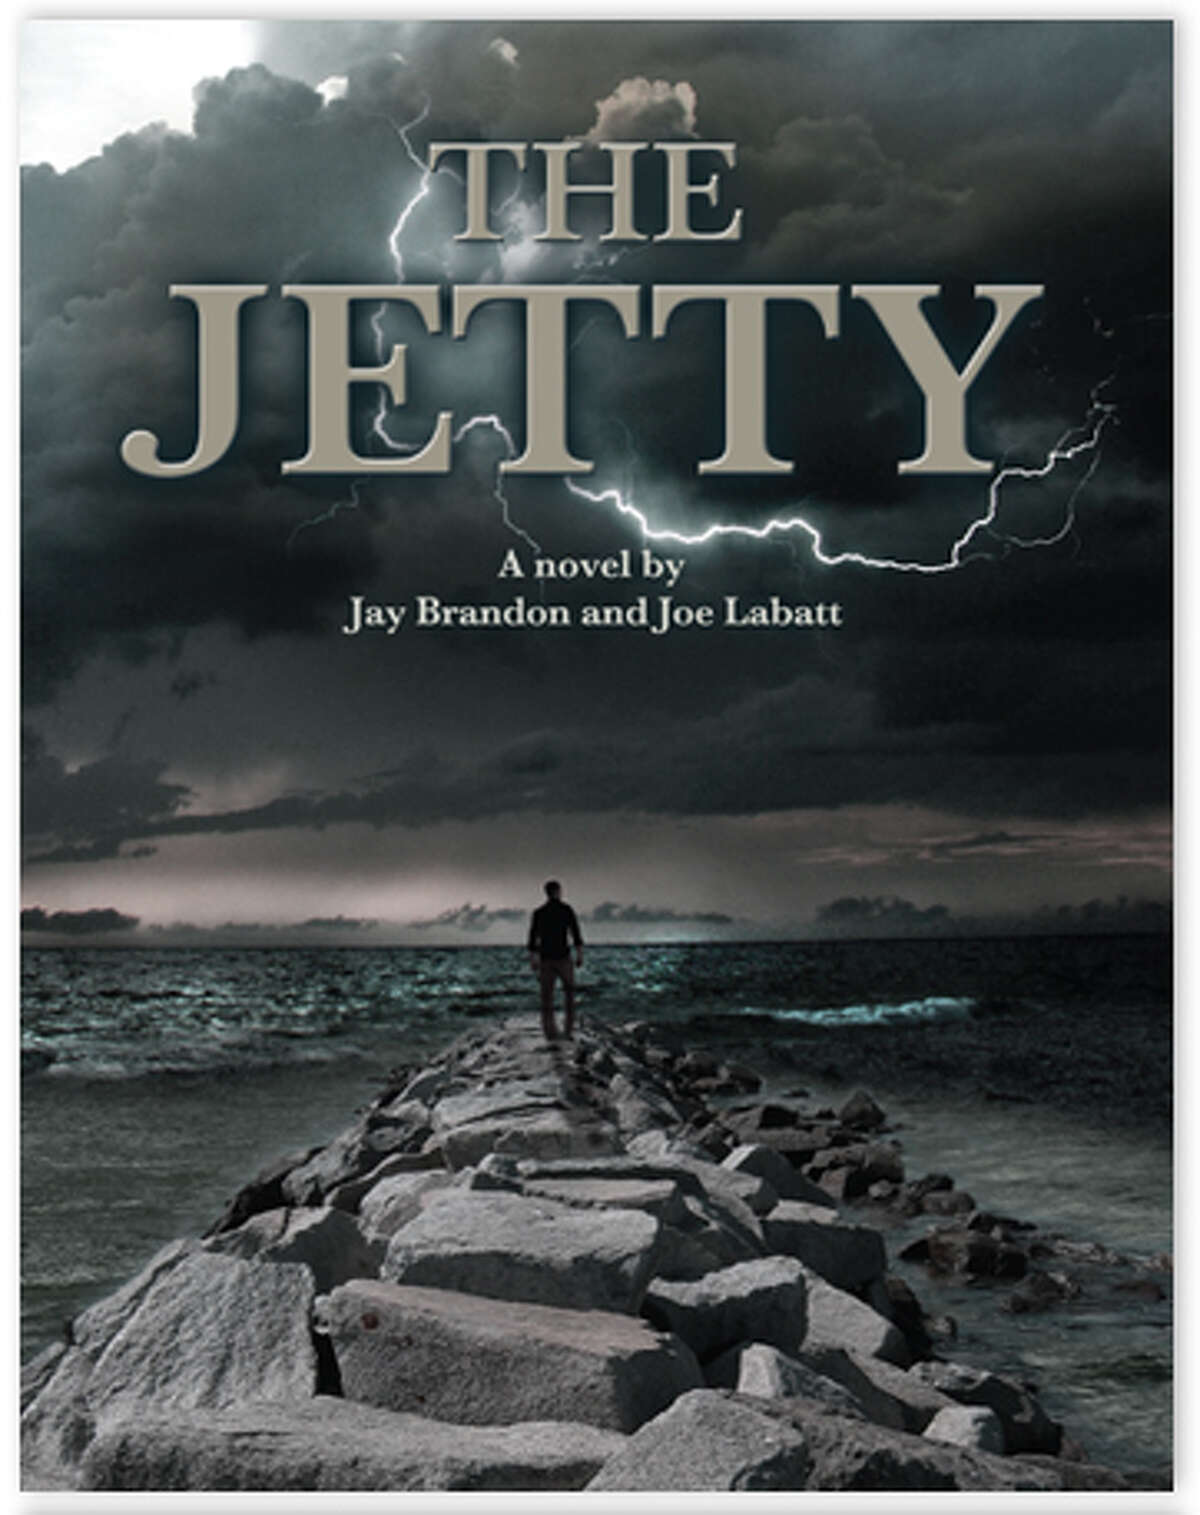 "The Jetty," written by local authors Jay Brandon and Joe Labatt, is a ghost story set in Port Aransas.